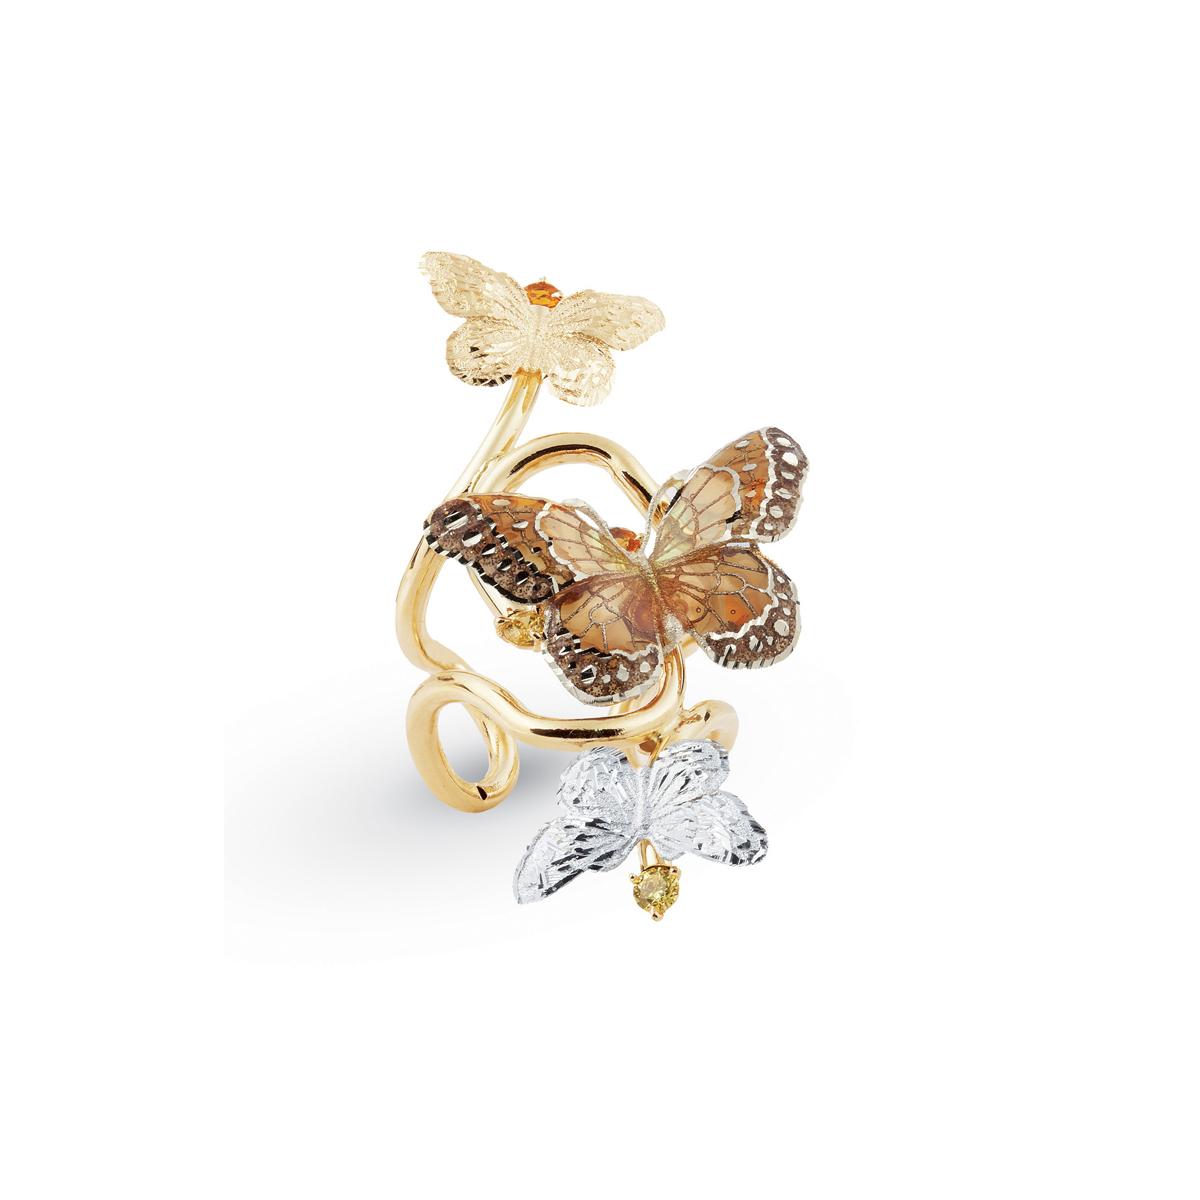 3 Butterflies ring in two-tone 18kt gold, cathedral enamel and Swarovski ™ stones - AC057-MN